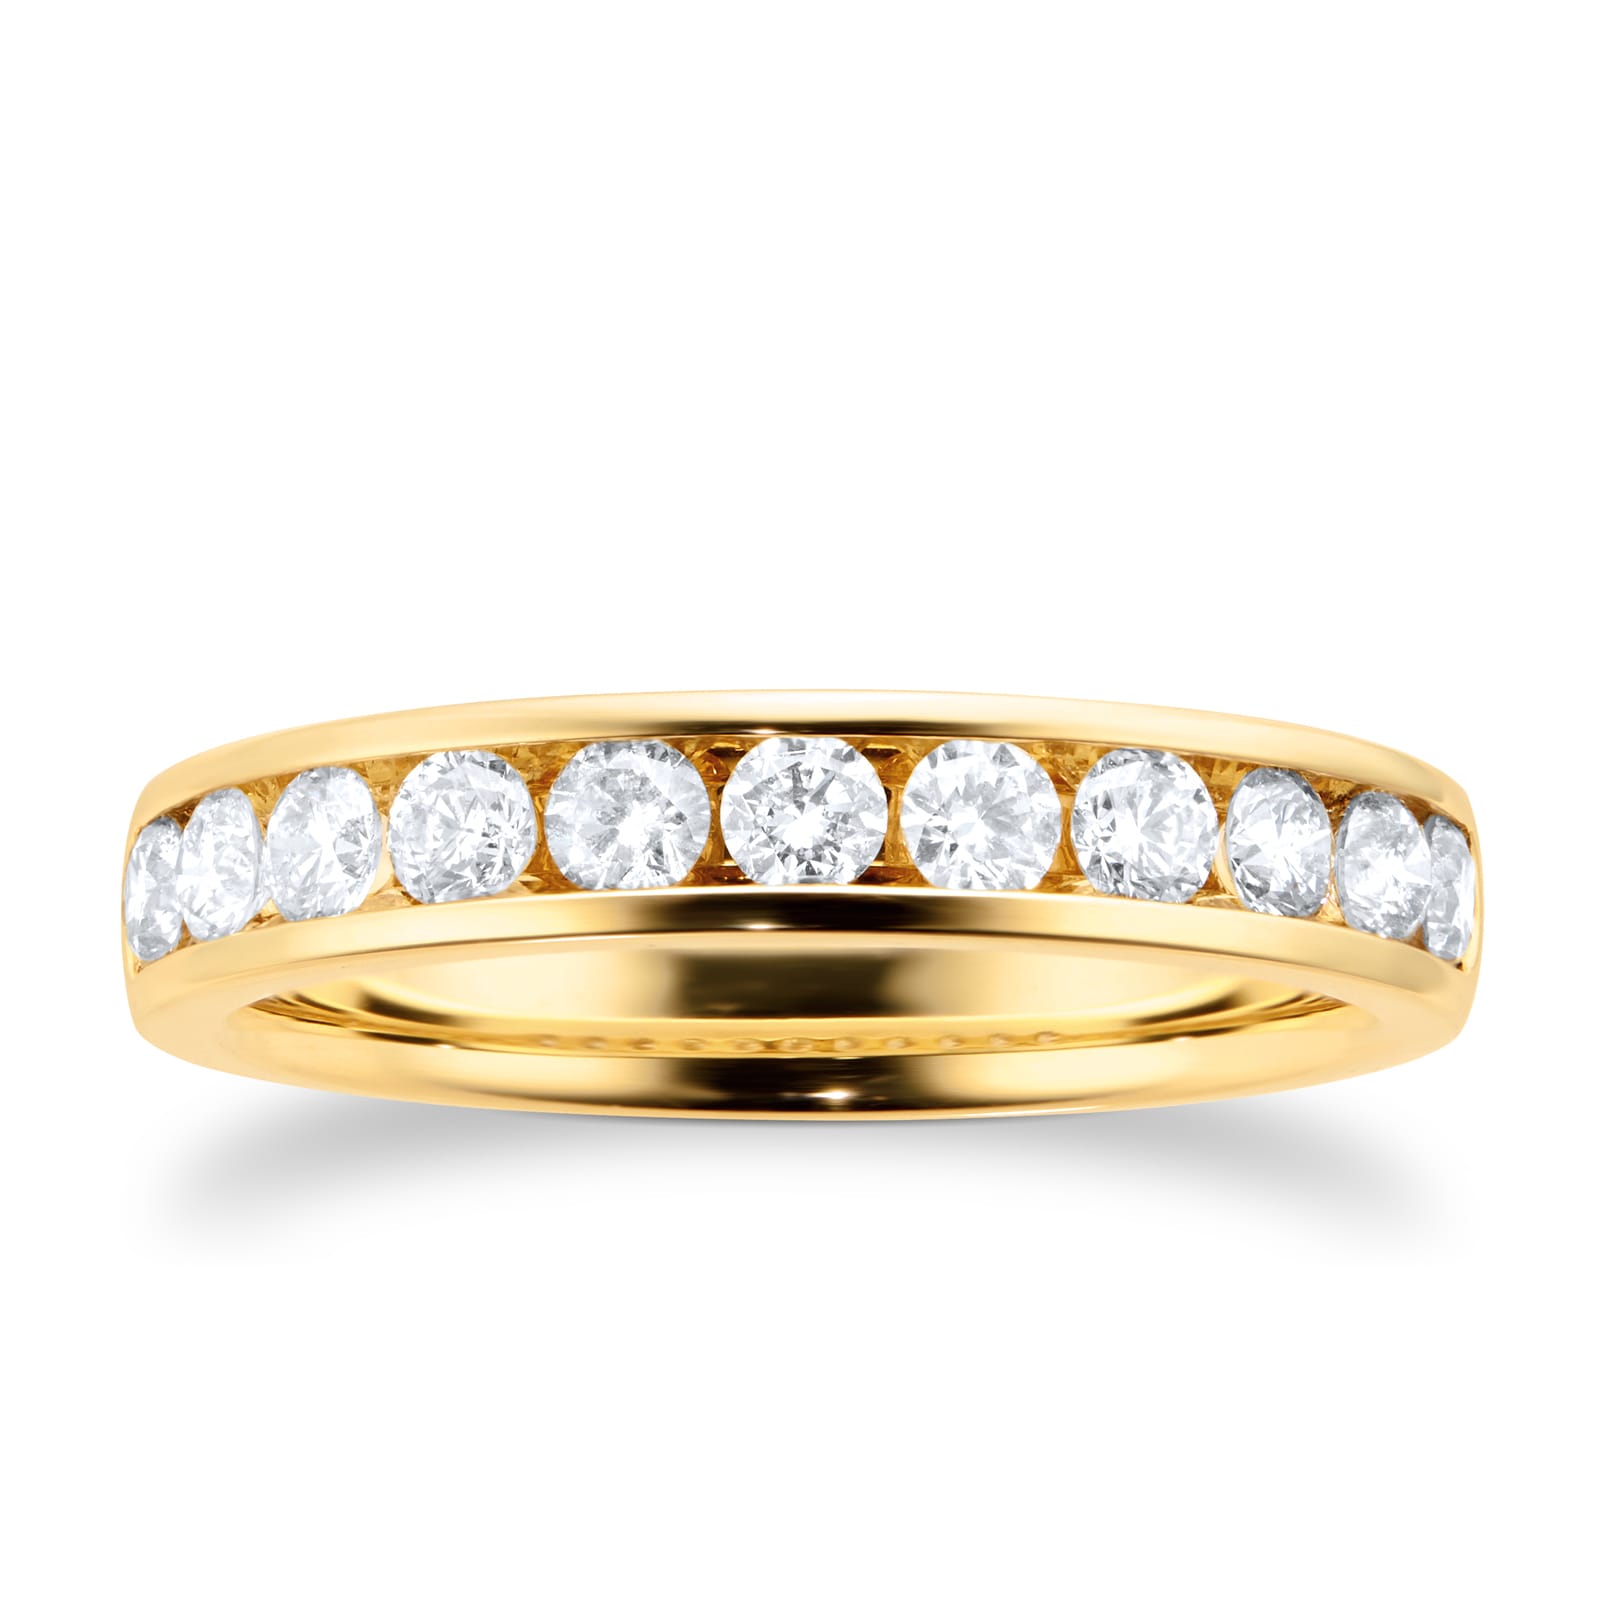 18ct Yellow Gold 0.70cttw Diamond 11 Stone Channel Set Eternity Ring - Ring Size N